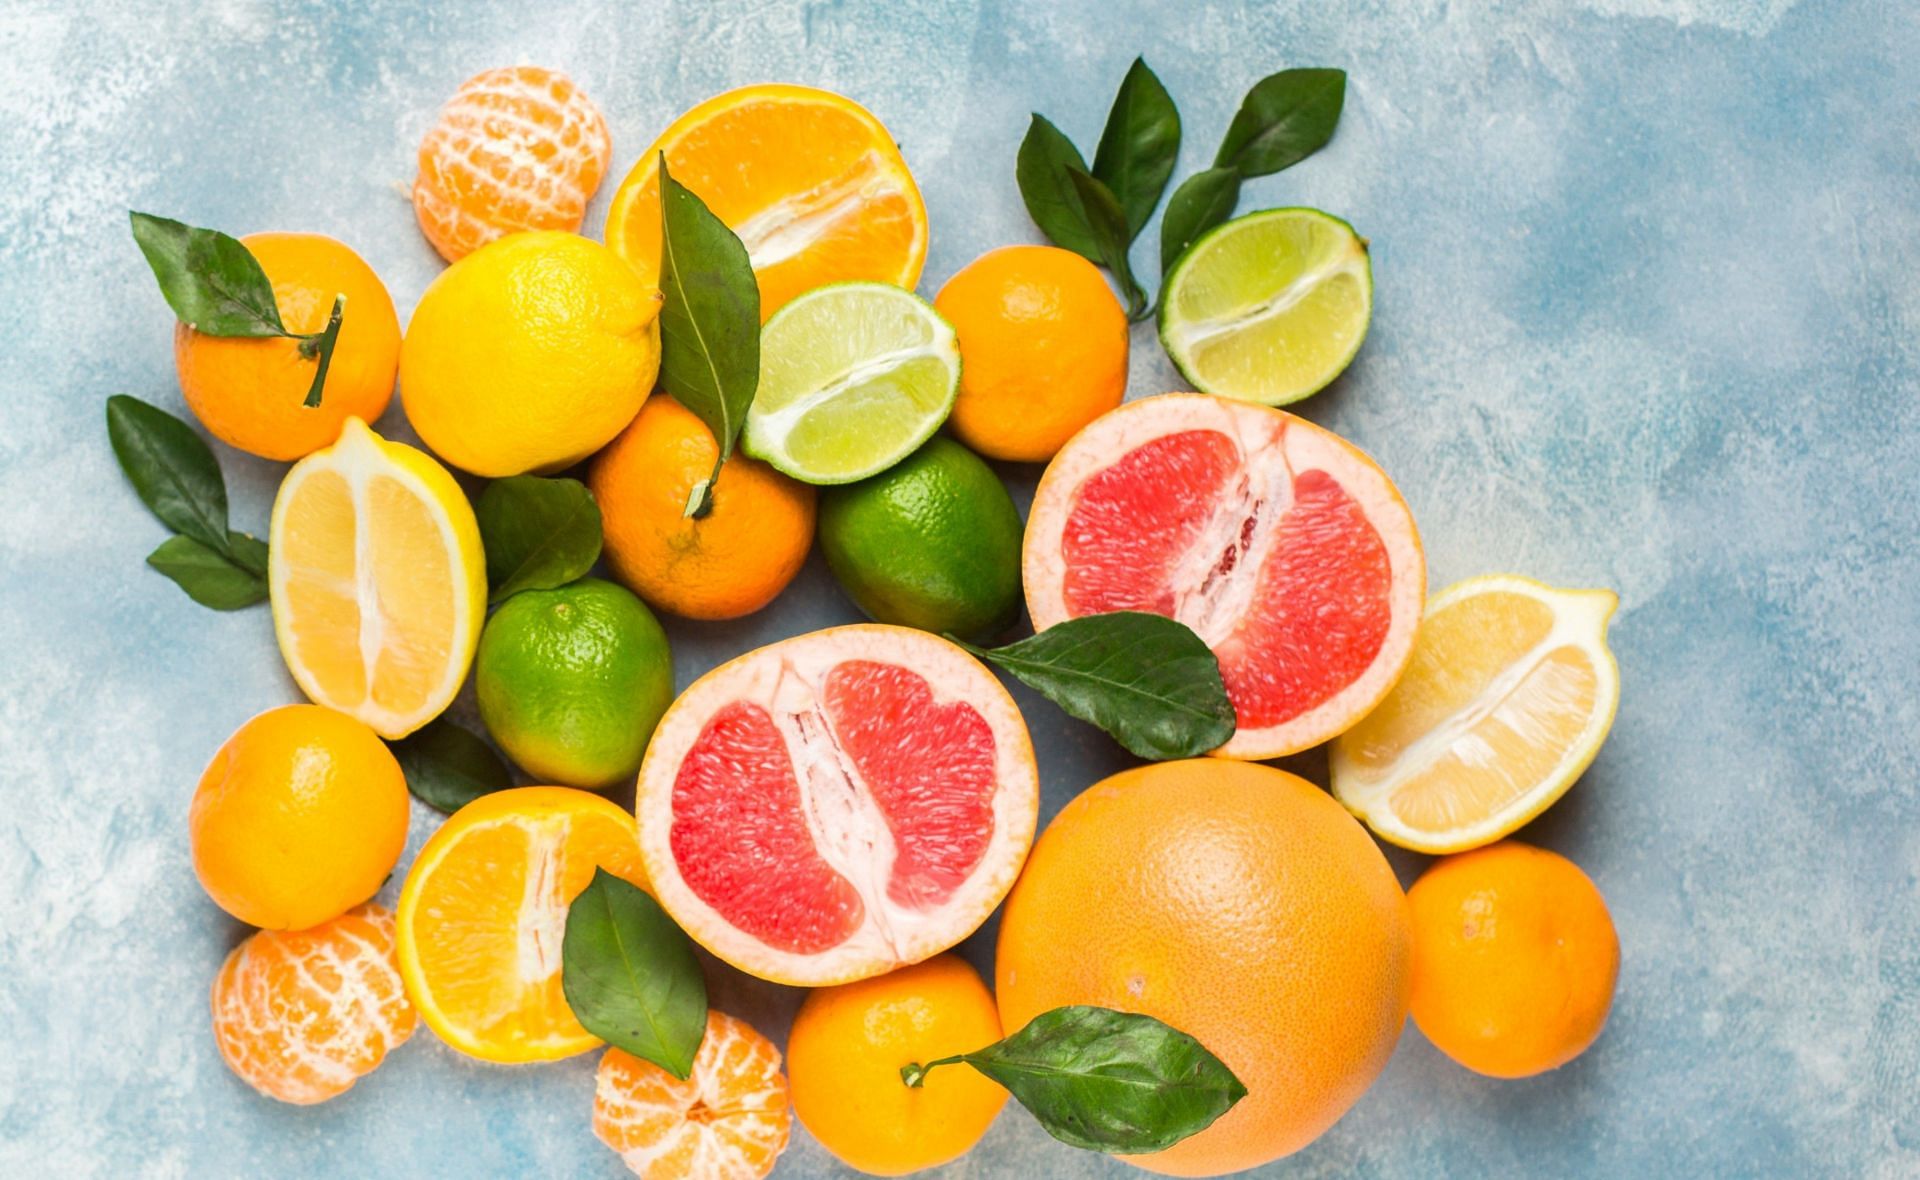 Citrus fruits plays a crucial role in maintaining eye health (Image via Pexels)